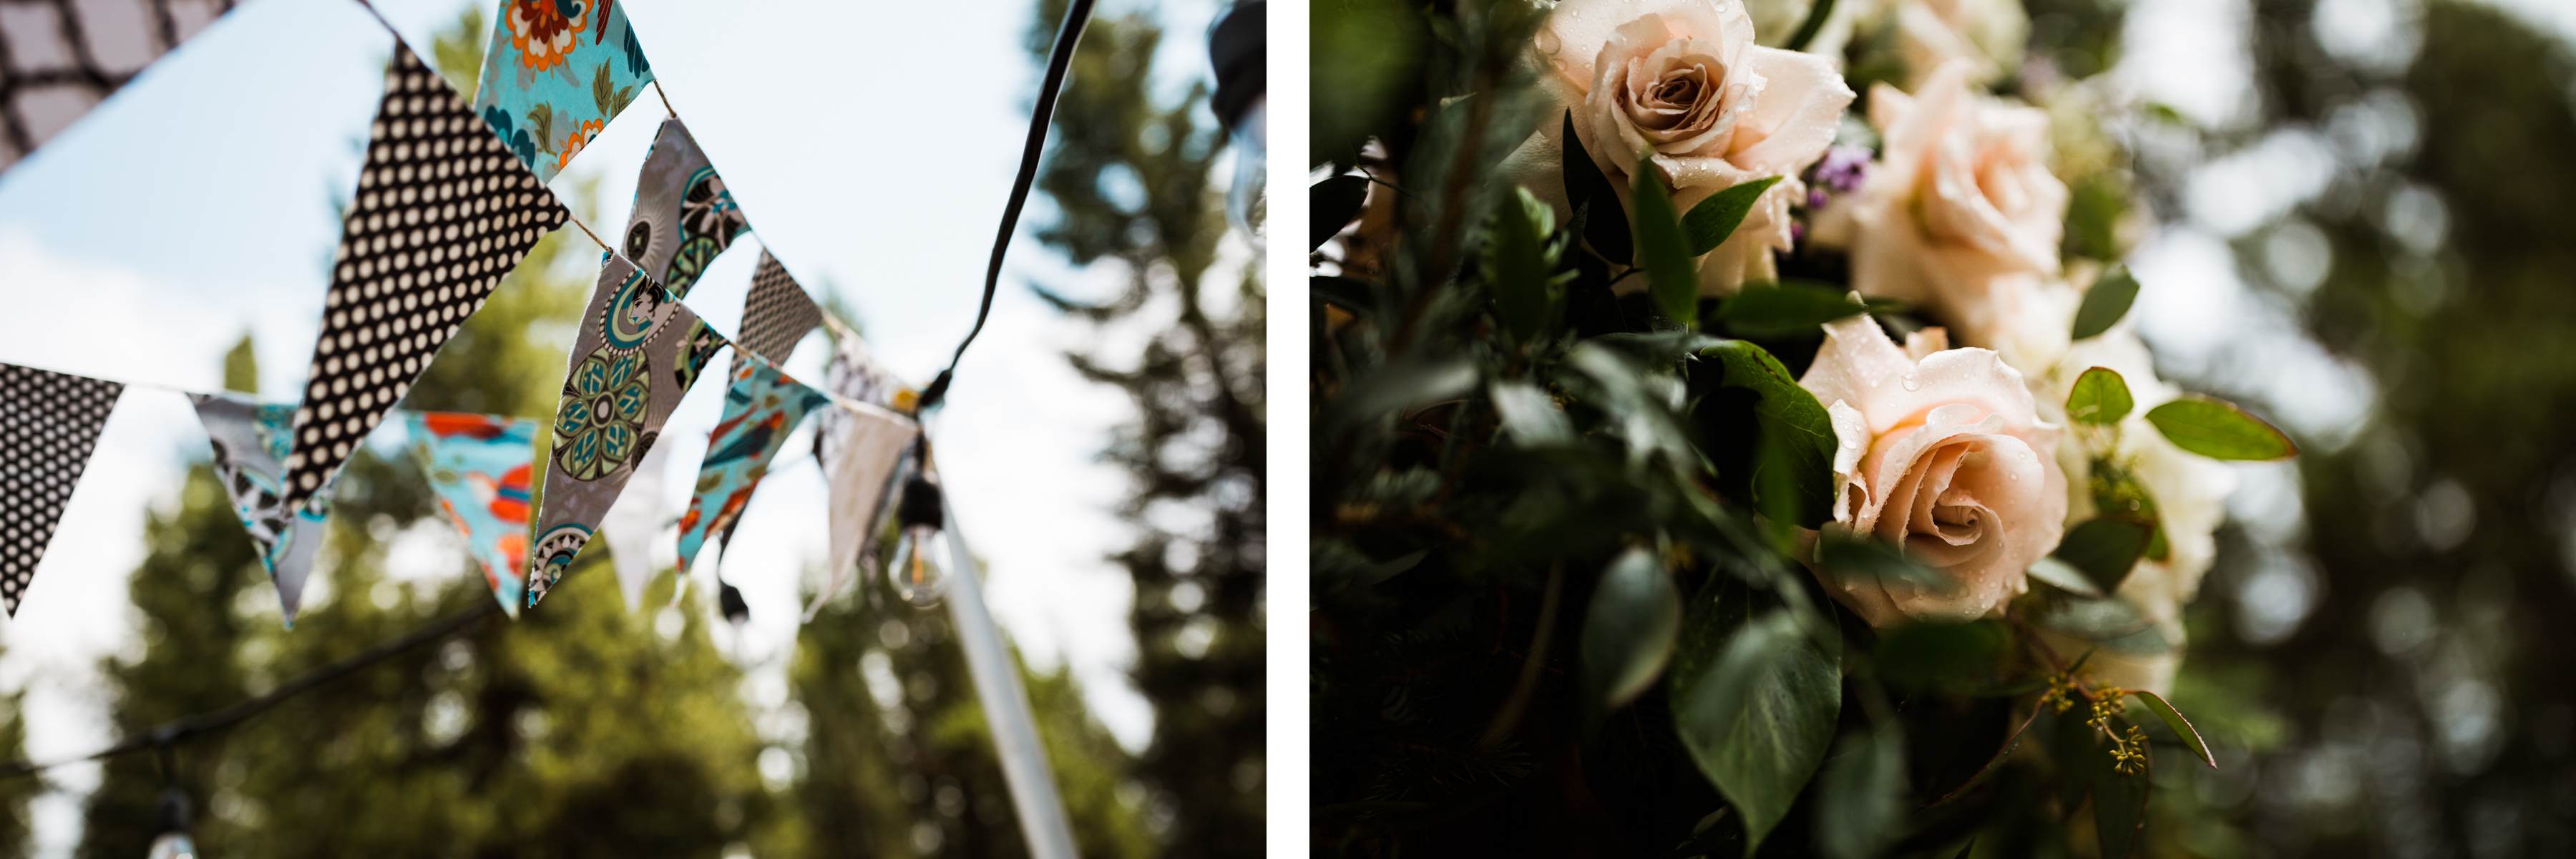 Canmore Camping Wedding Photography - Image 3